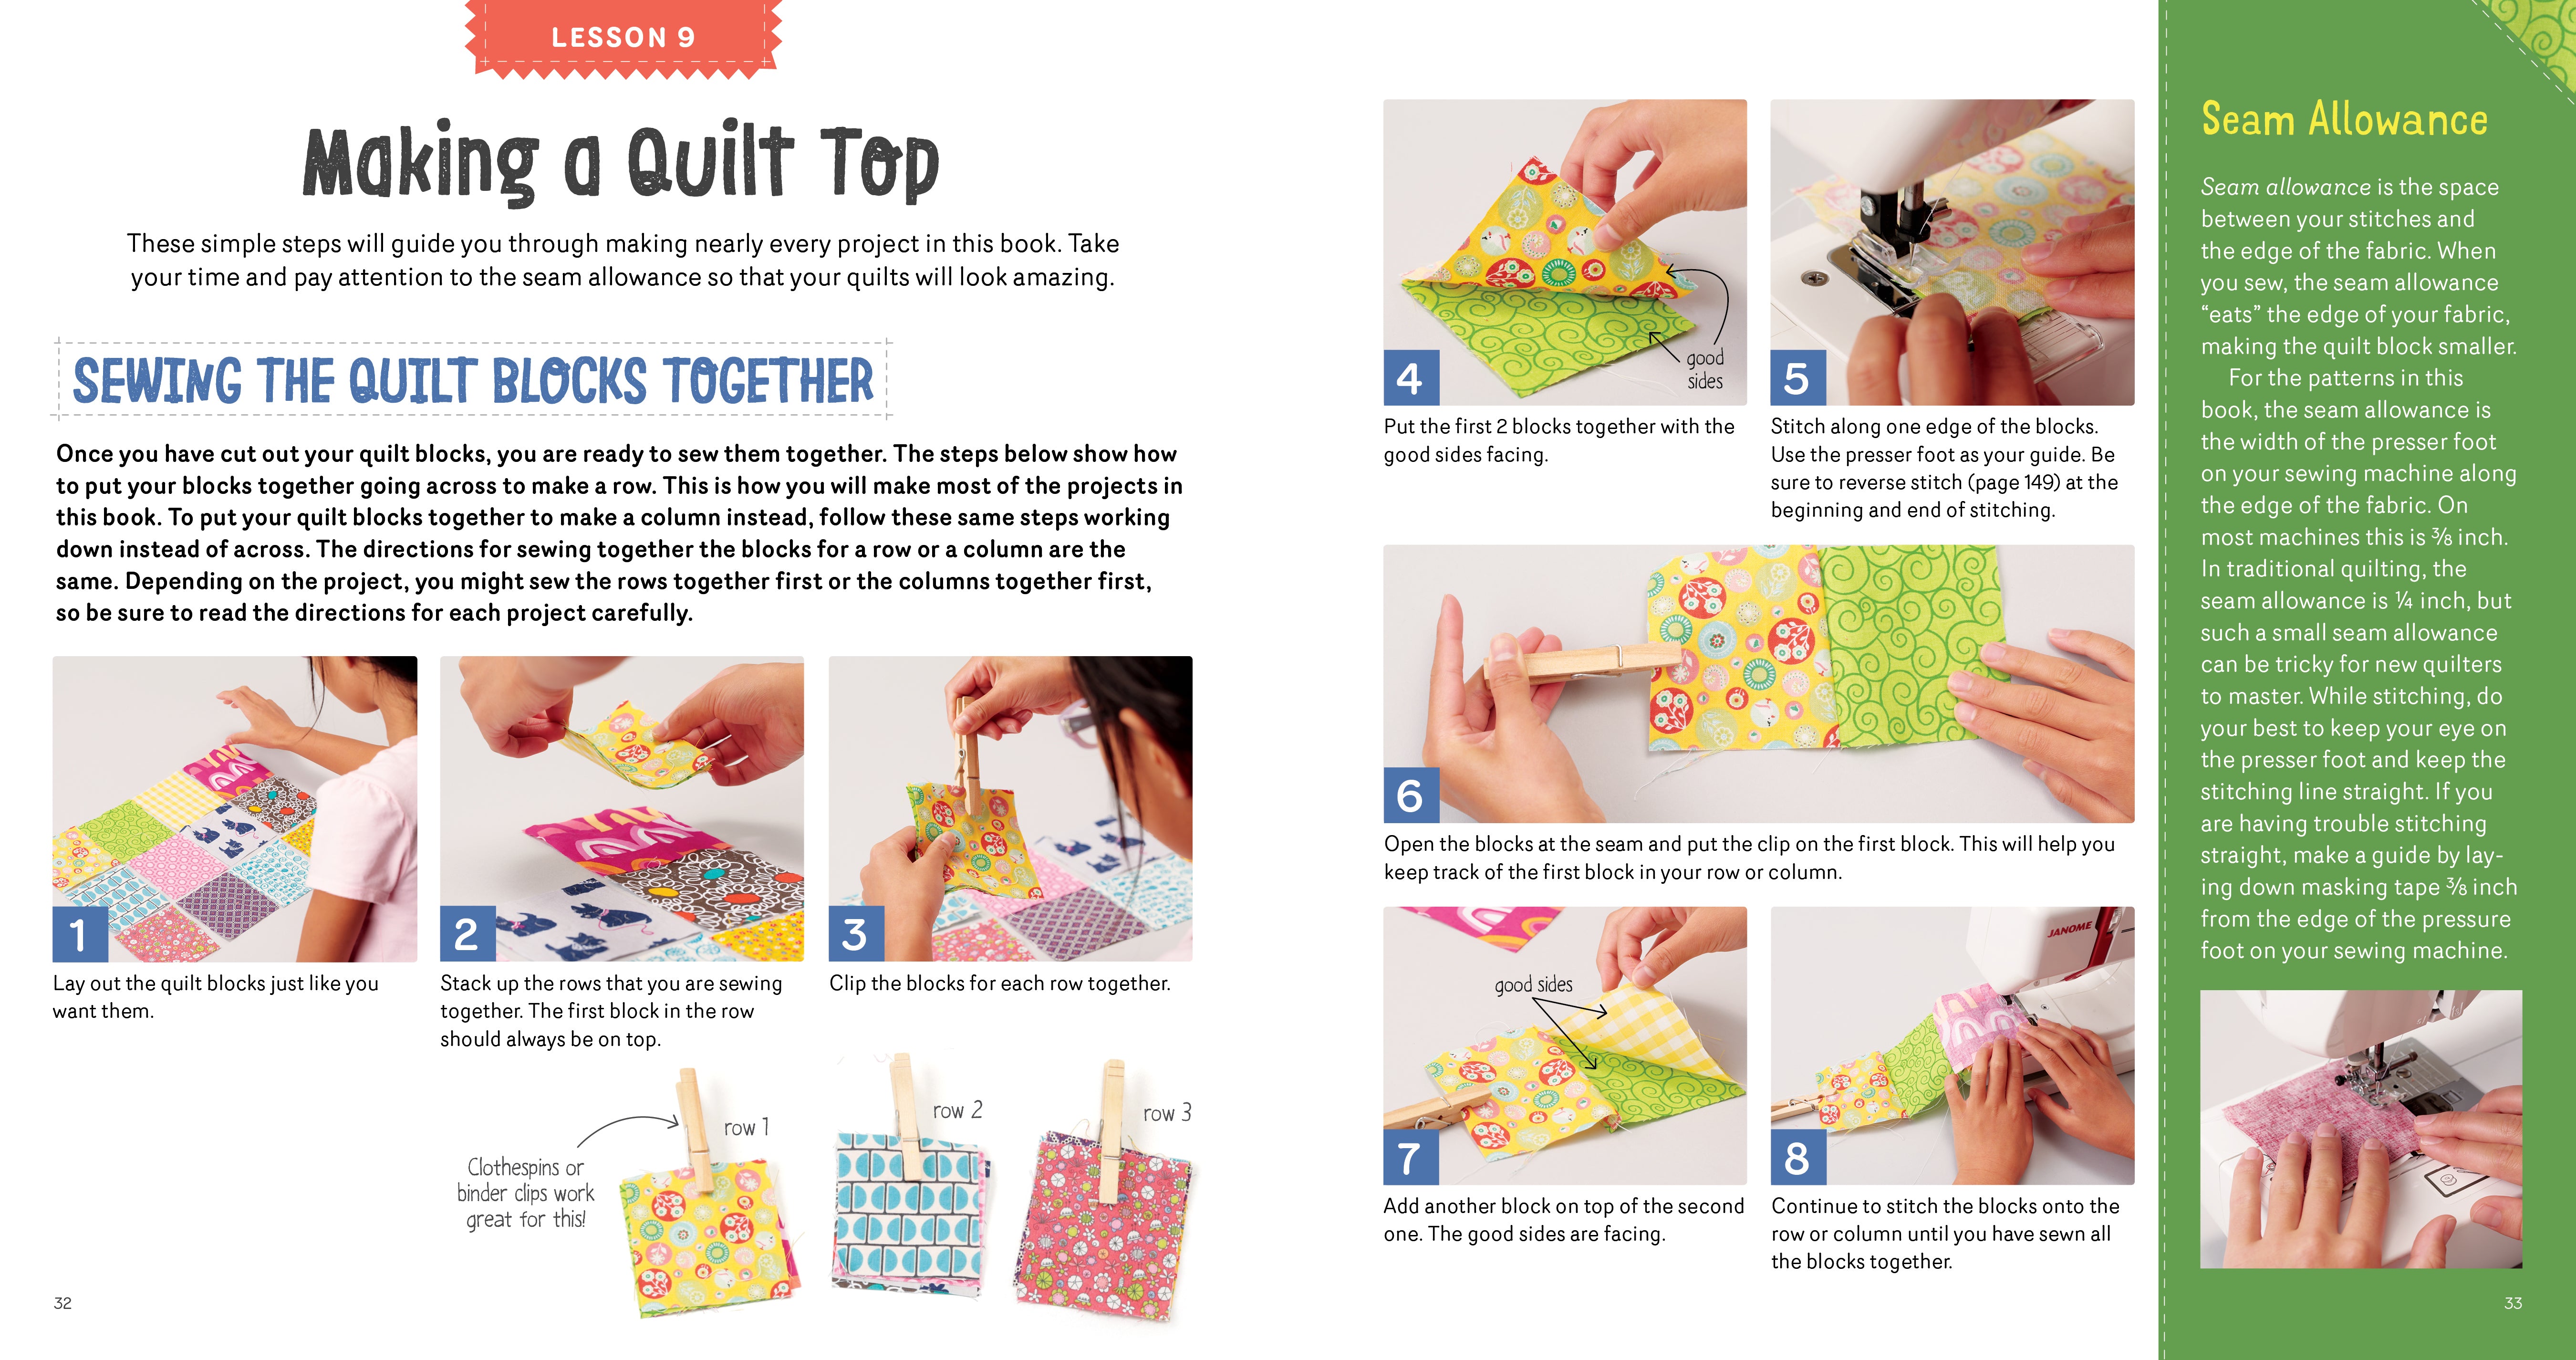 Sewing School Quilts - 15 Projects Kids Will Love To Make    